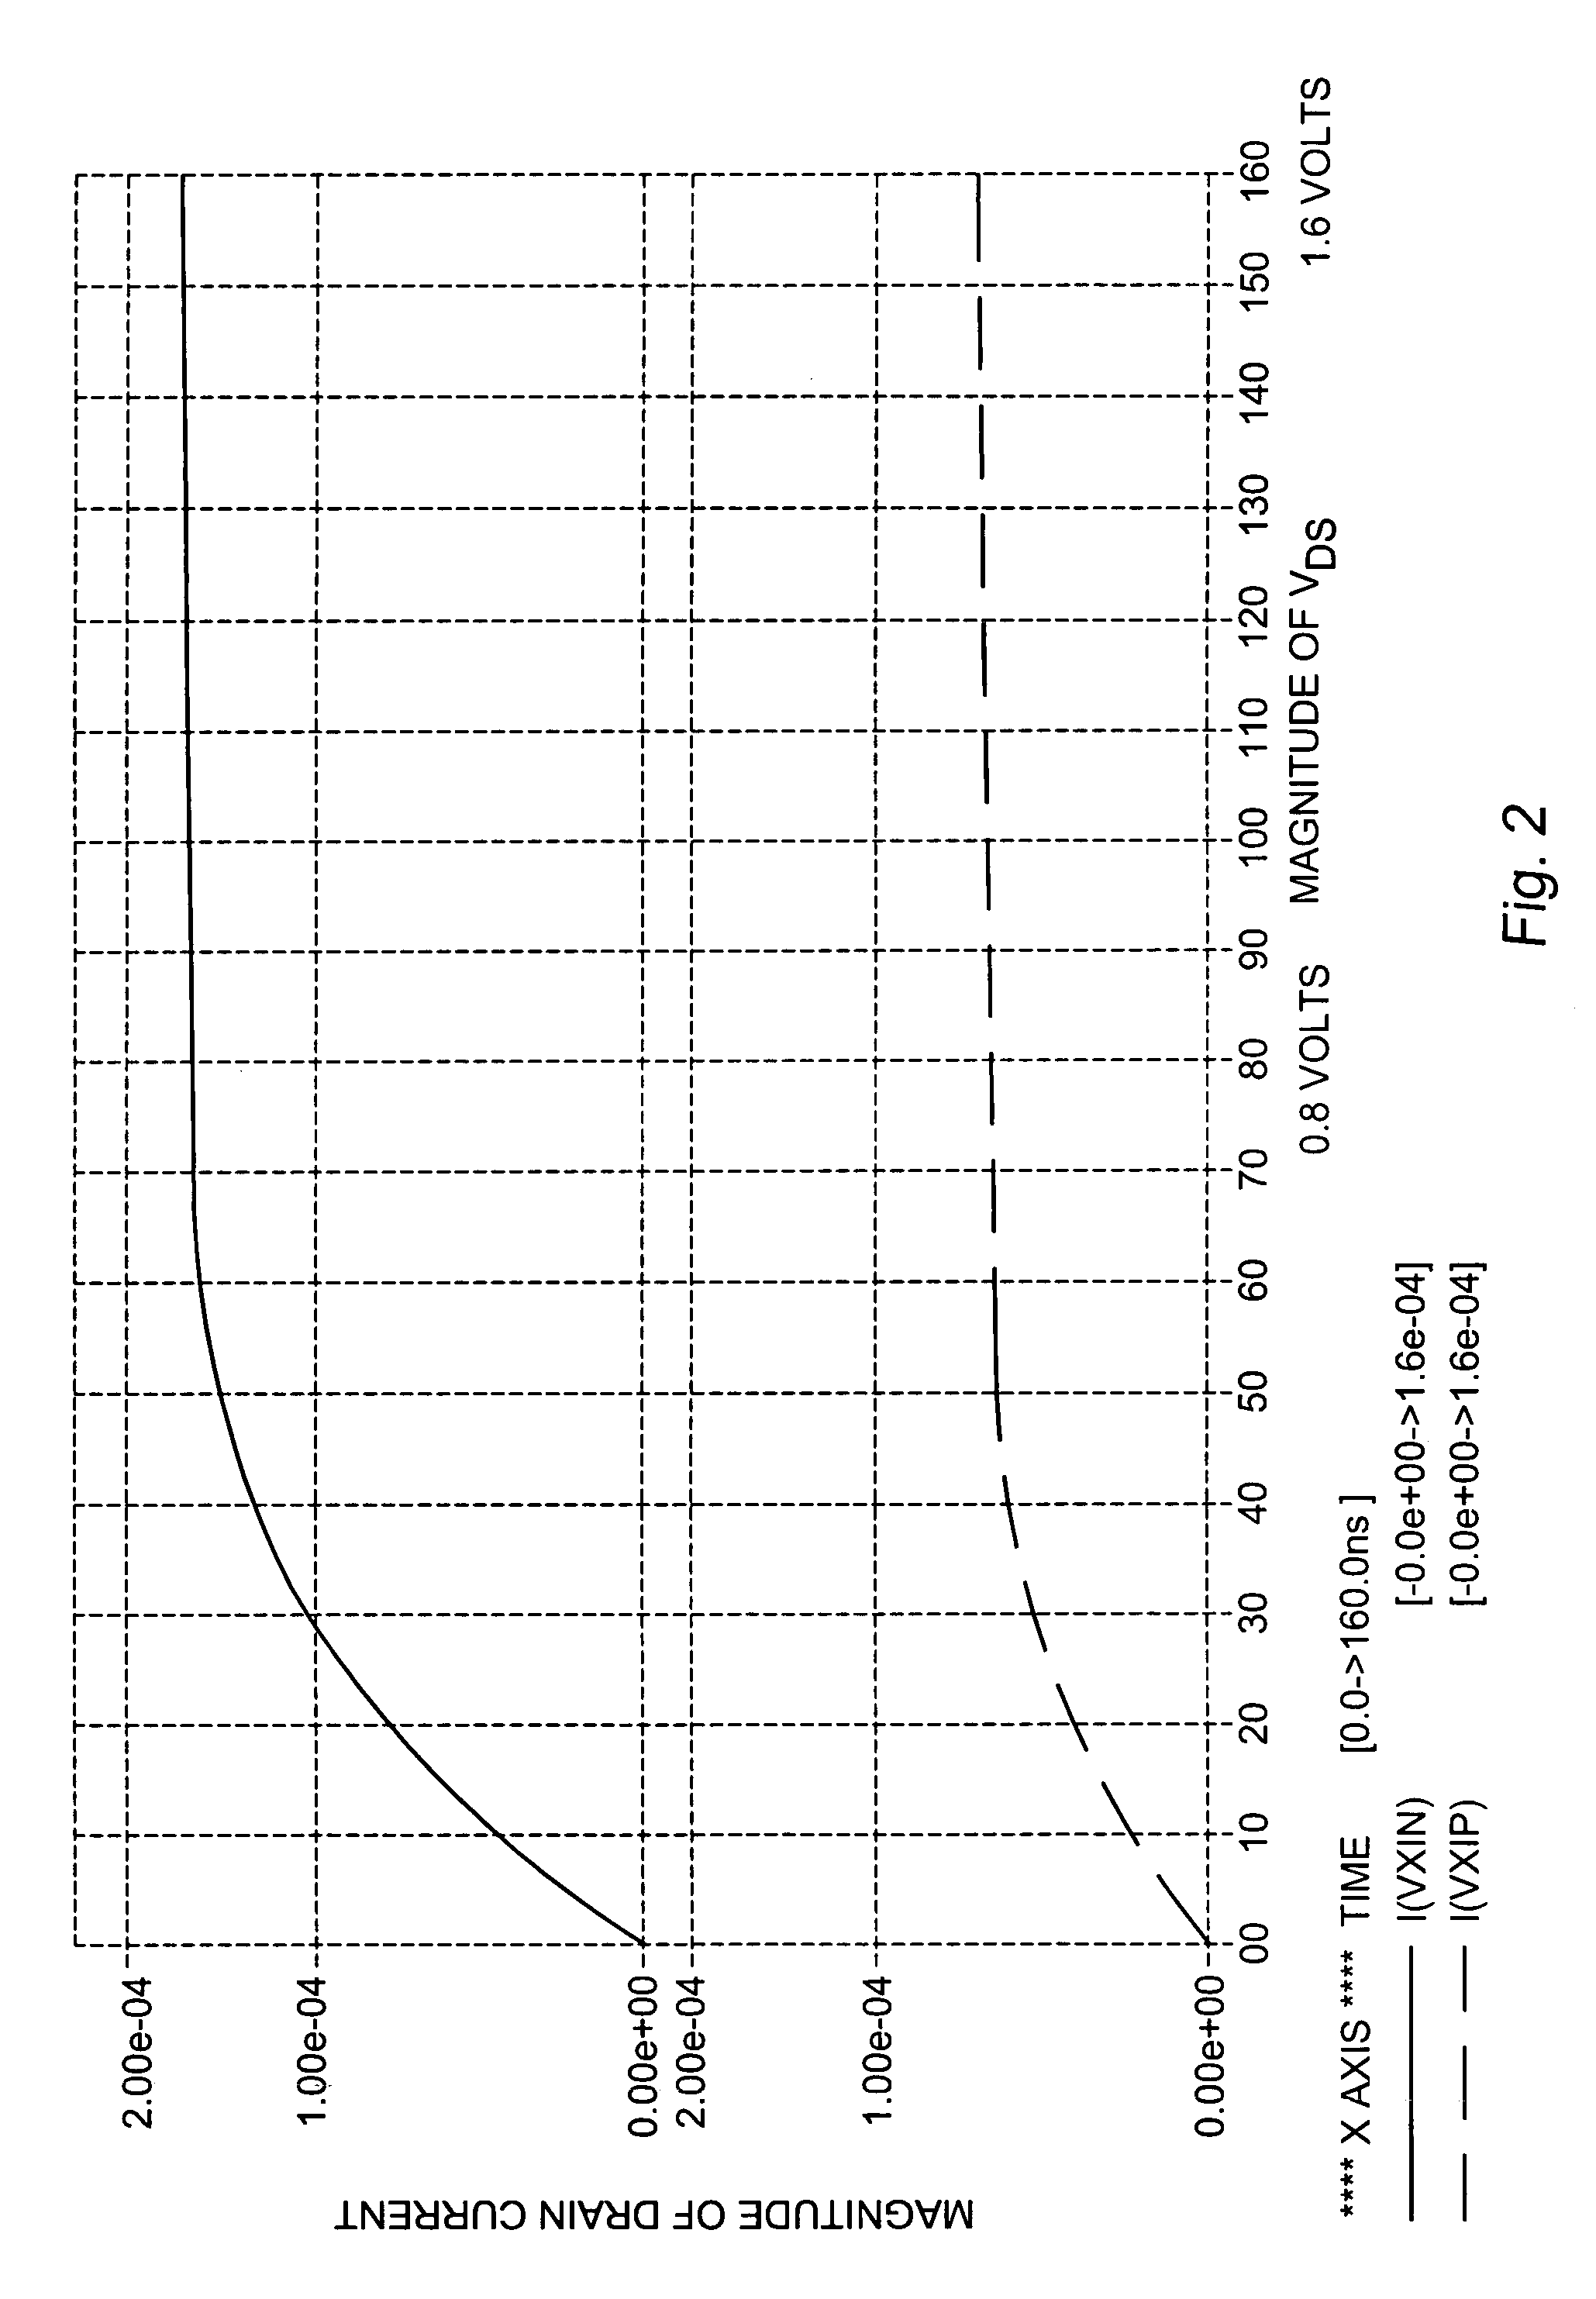 Low voltage differential amplifier circuit for wide voltage range operation